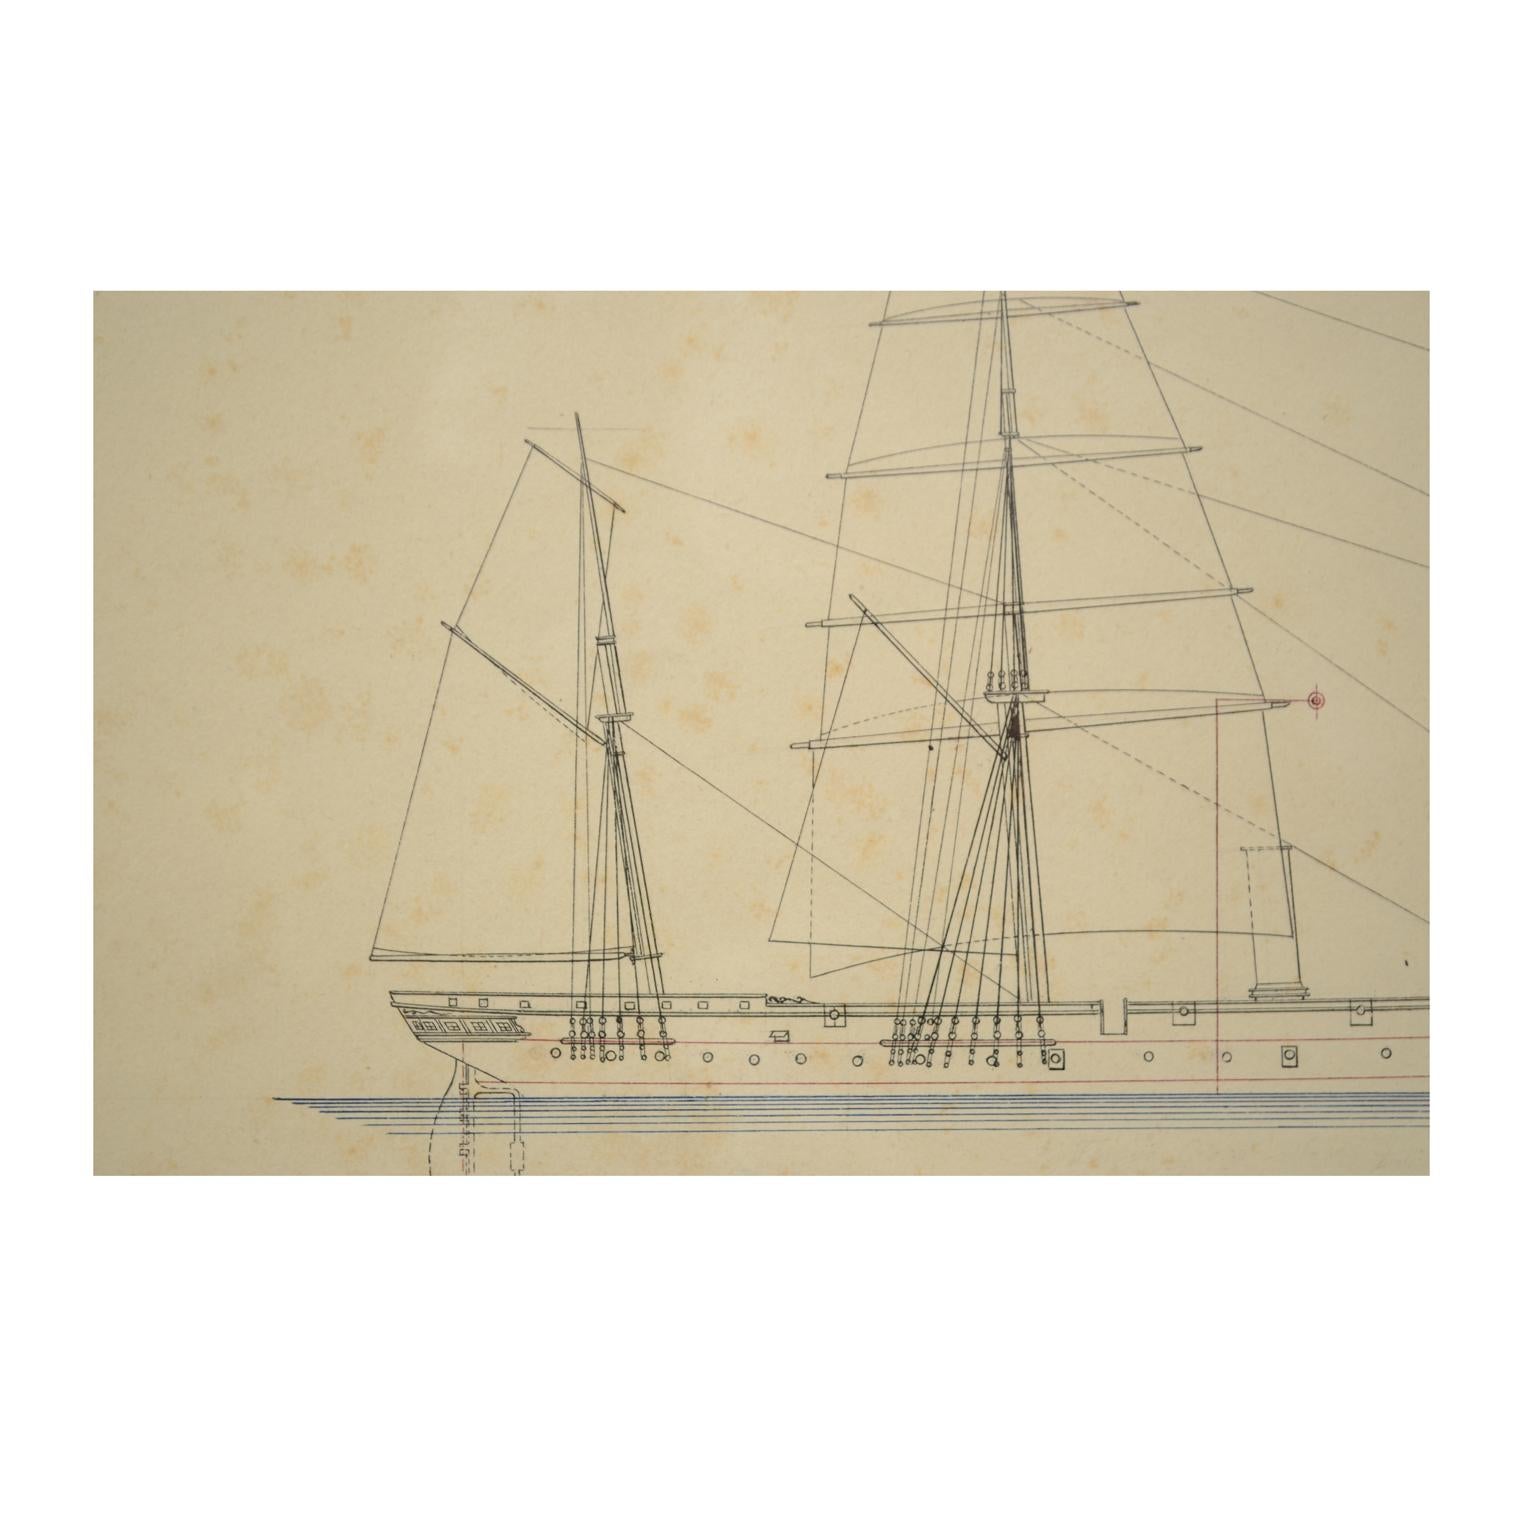 Paper Print no. 1 of 400 Depicting a Nautical Schooner Made in the Mid-19th Century For Sale